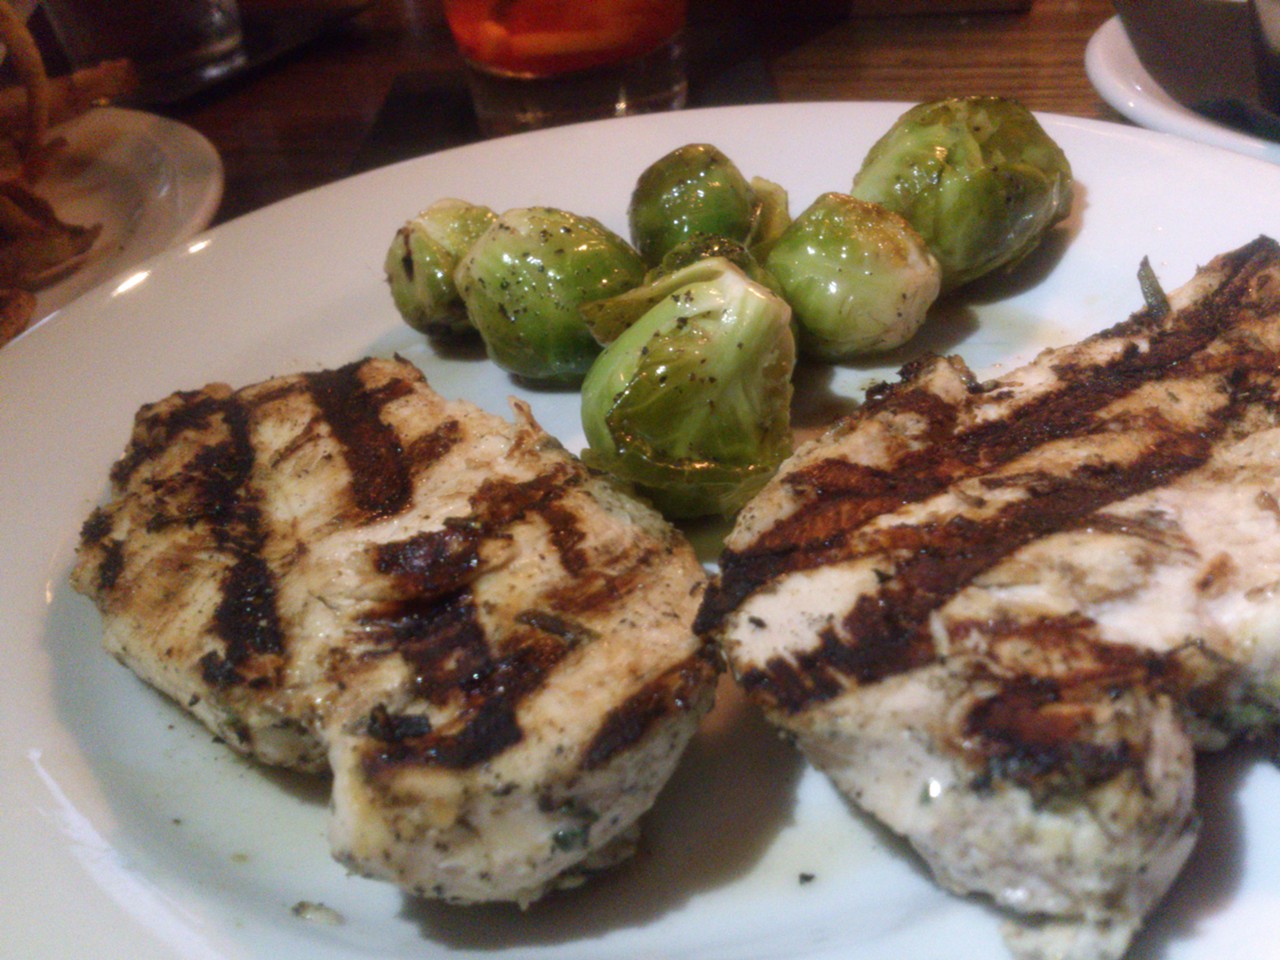 The lighter side: herb-marinated chicken and Brussels sprouts at Church Street Tavern